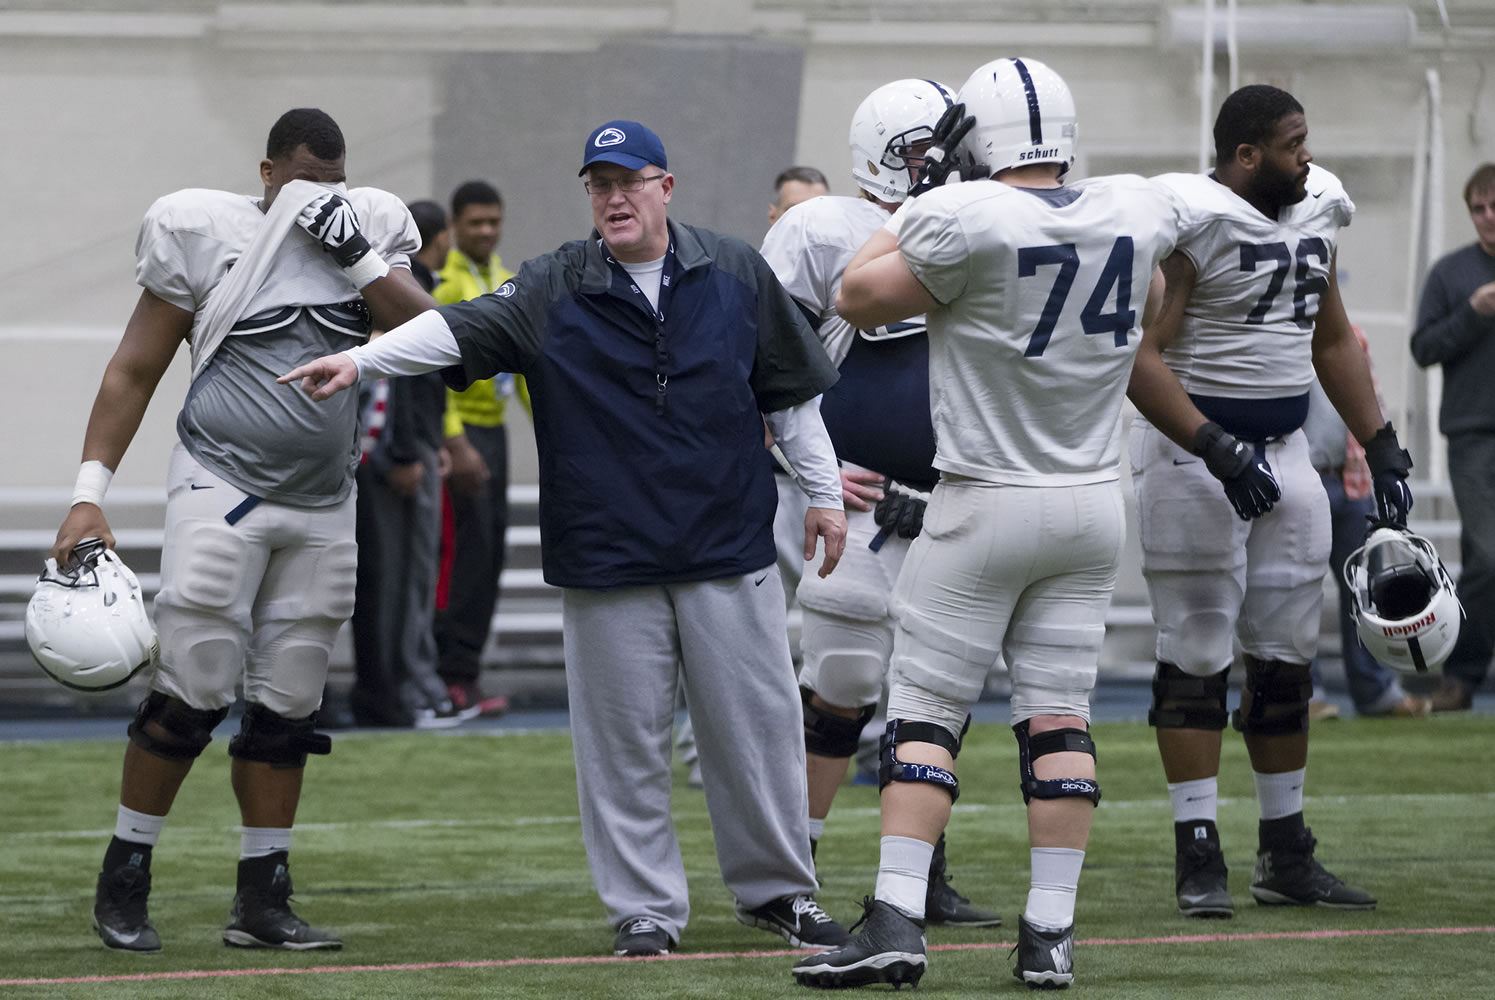 Associated Press
Penn State offensive line coach Herb Hand motions to players during a team practice in State College, Pa.